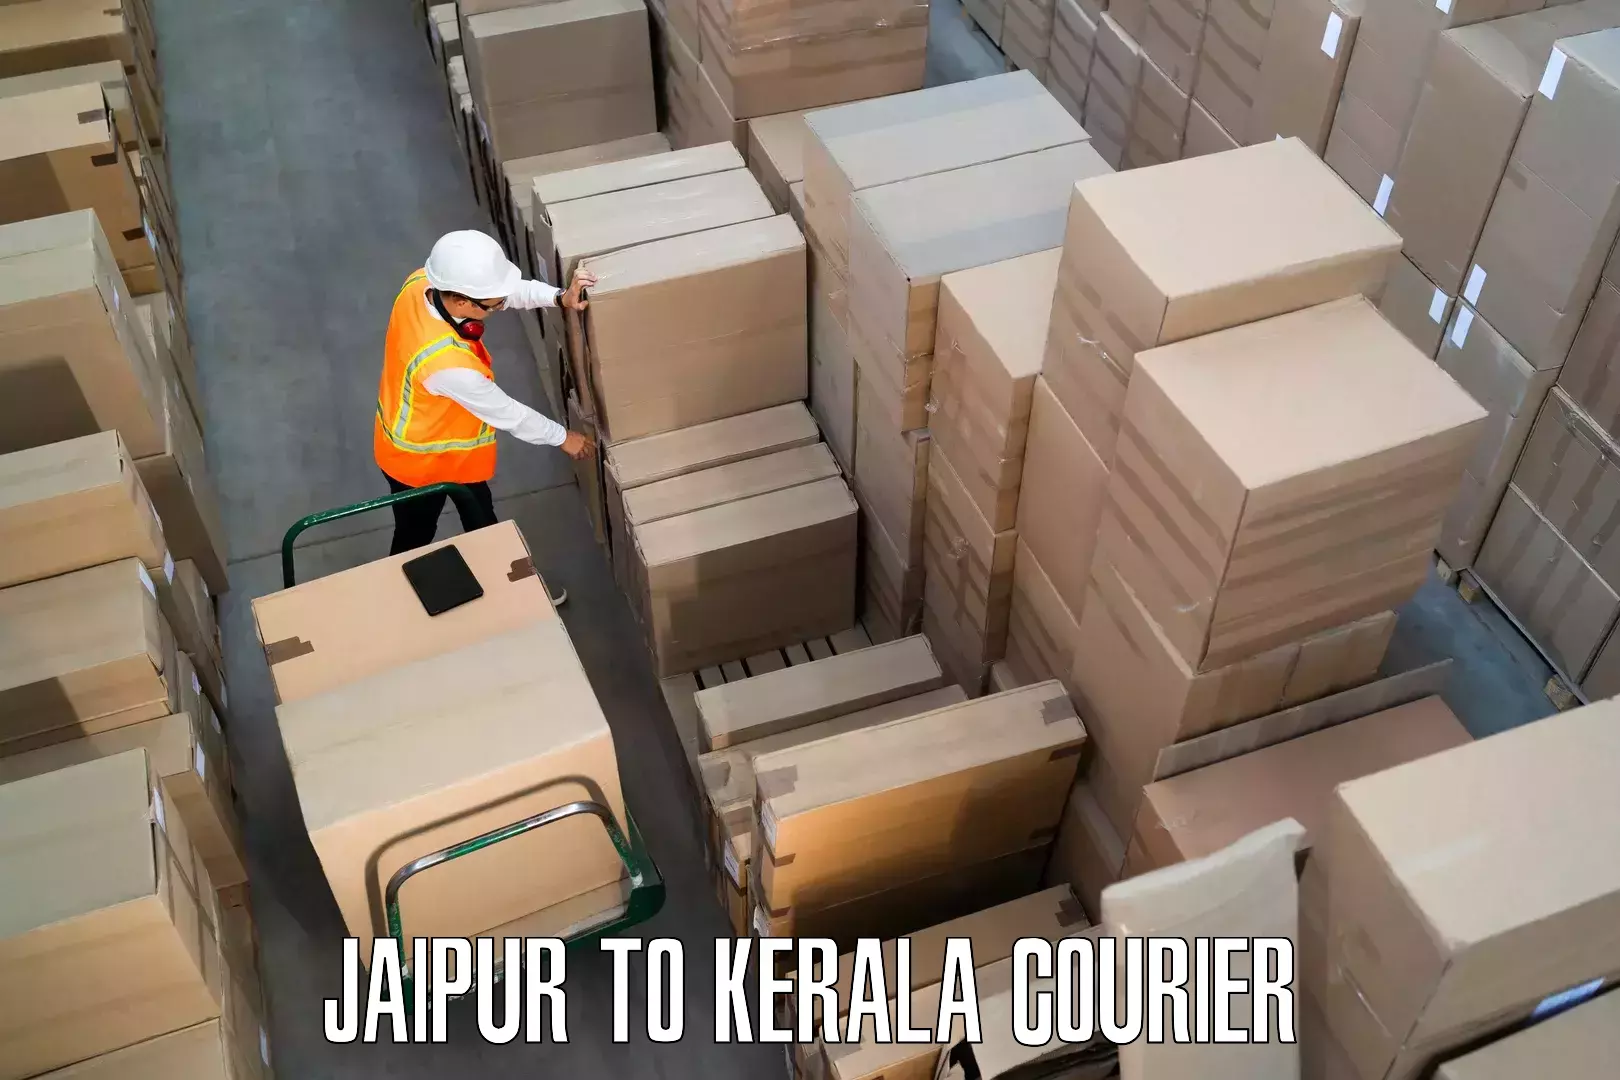 Furniture delivery service Jaipur to Koothattukulam